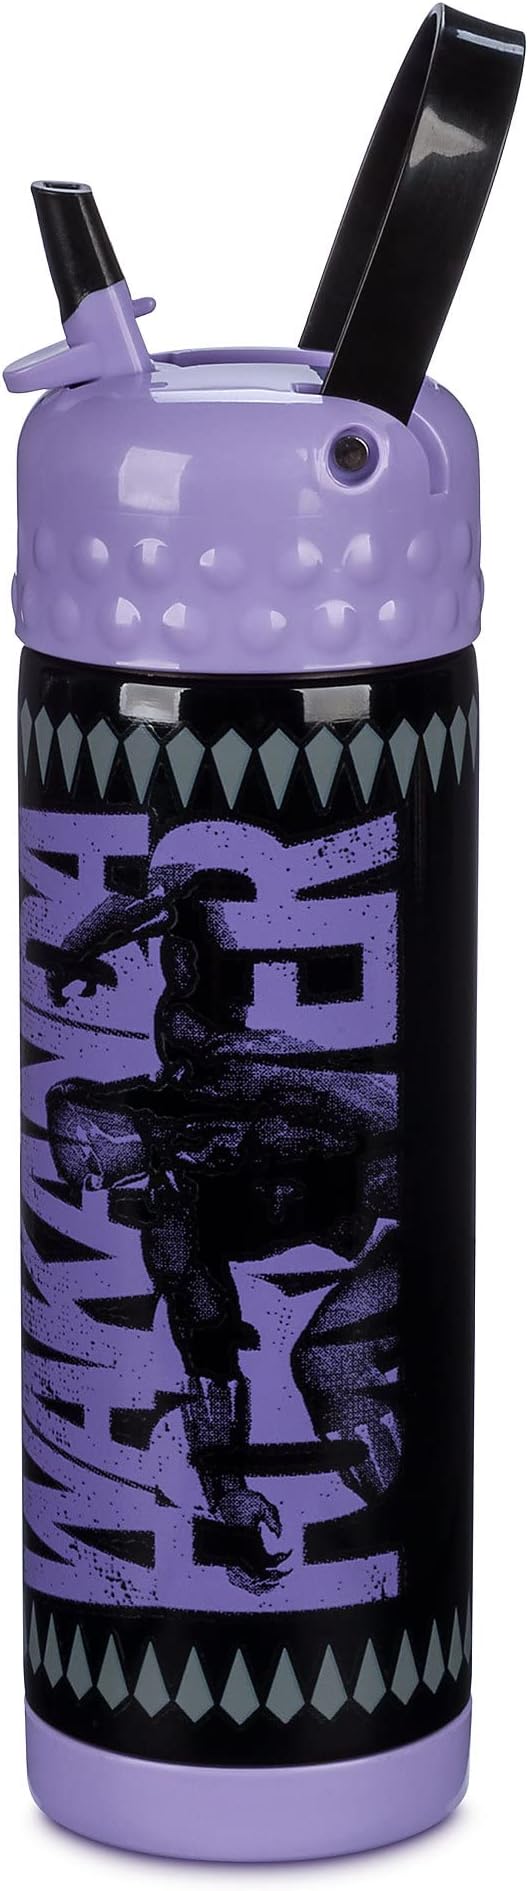 MARVEL BLACK PANTHER STAINLESS STEEL WATER BOTTLE